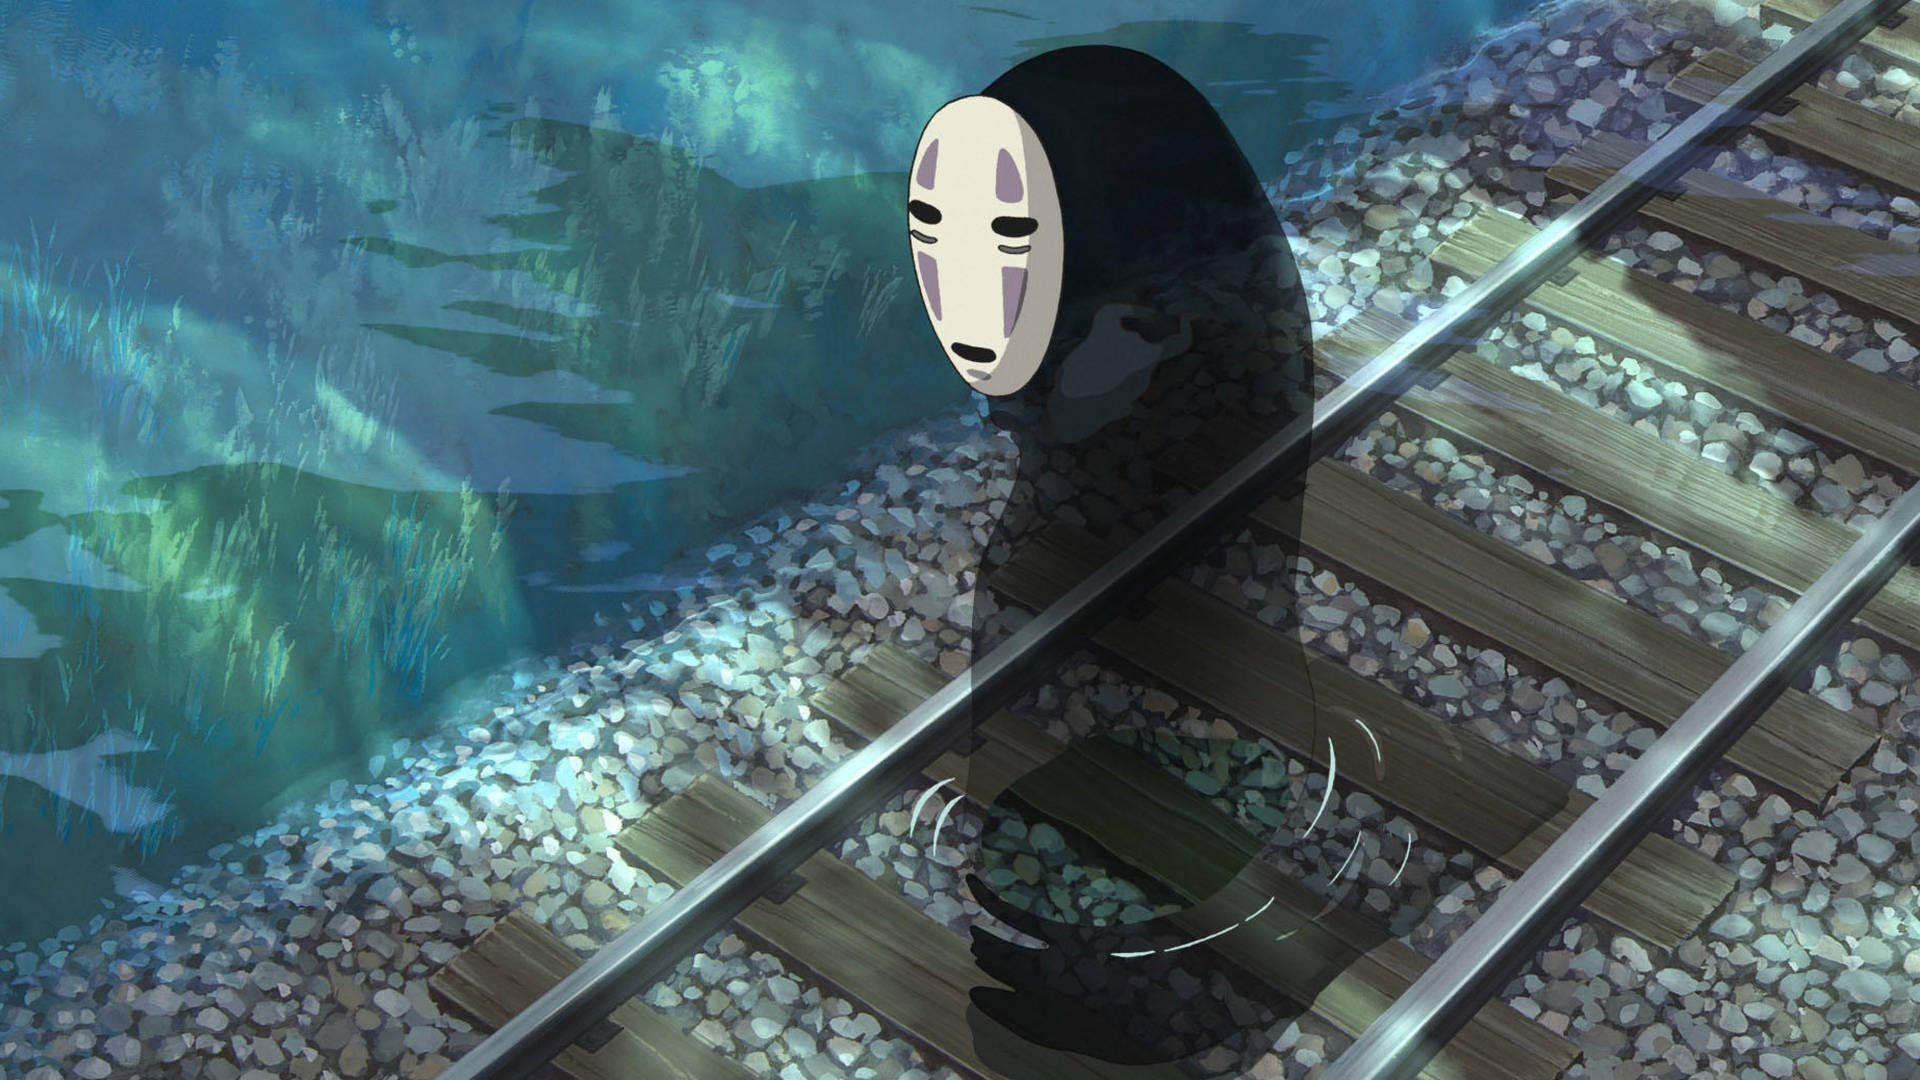 No-face Wooden Rail Background